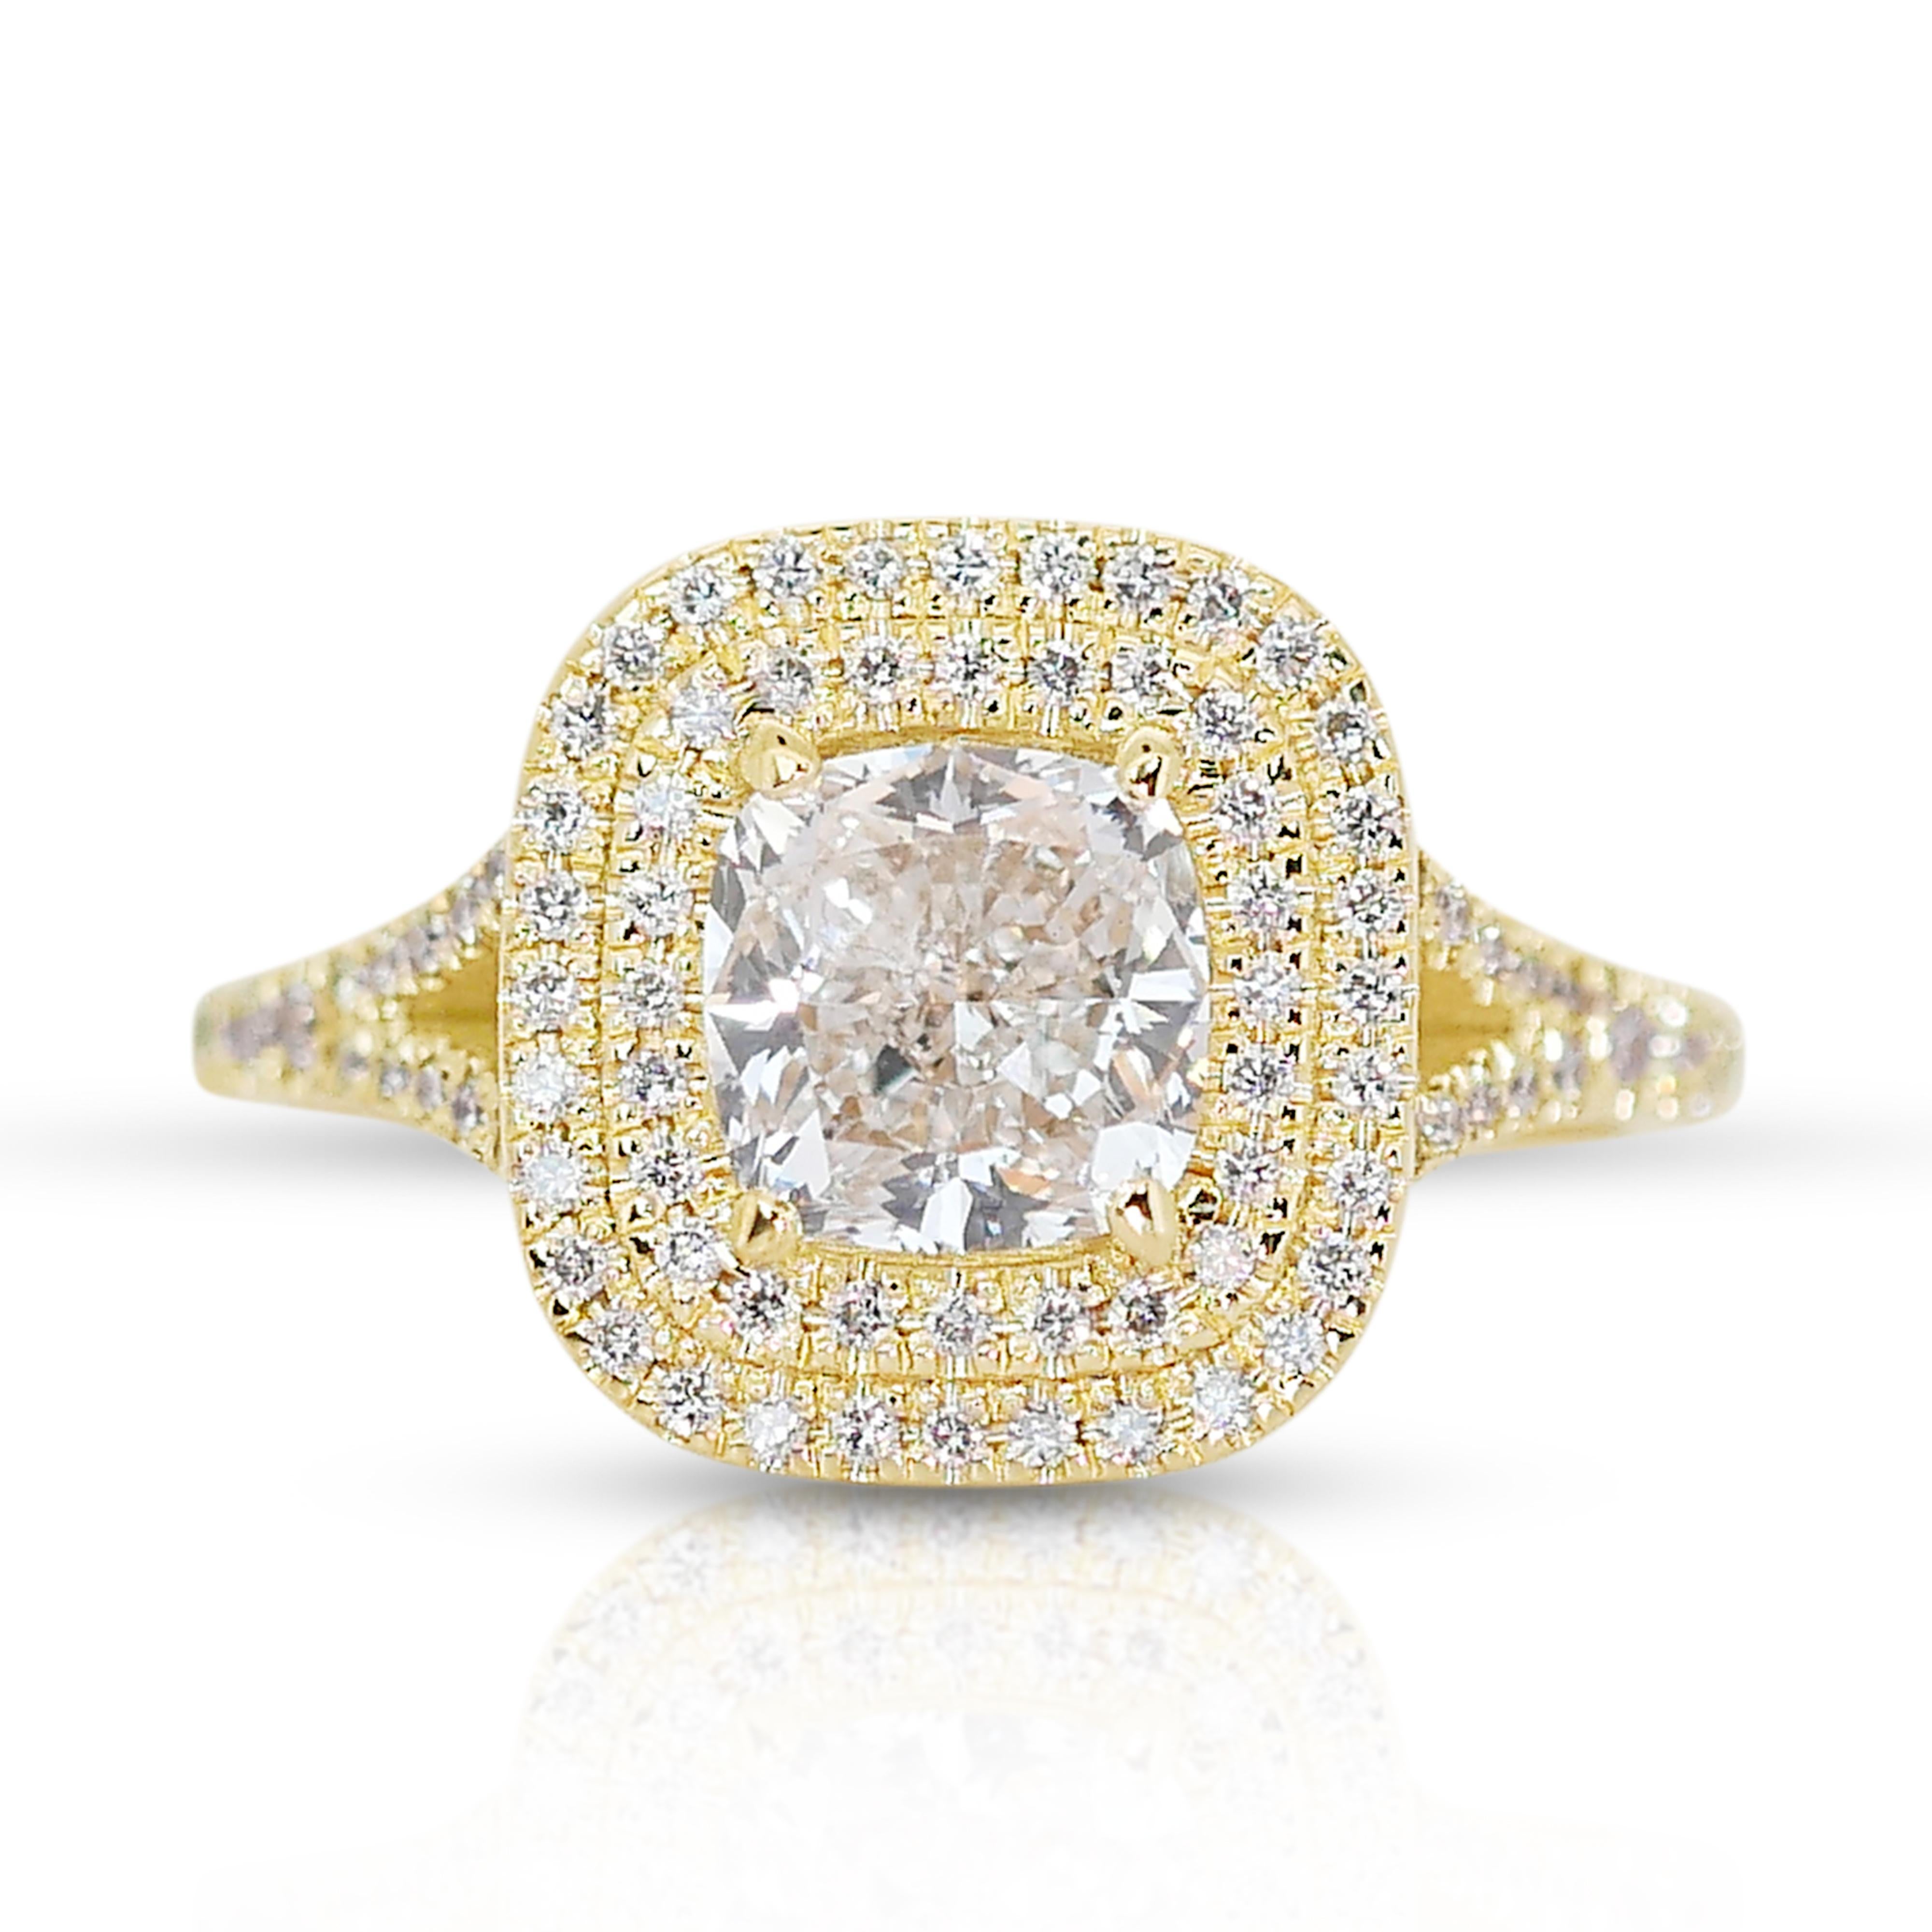 Radiant 18k Yellow Gold Cushion Diamond Double Halo Ring w/1.82 ct - IGI Certified

Elevate your style with this diamond double halo ring crafted in lustrous 18k Yellow Gold. At the heart of this breathtaking piece is a 1.50 ct square cushion